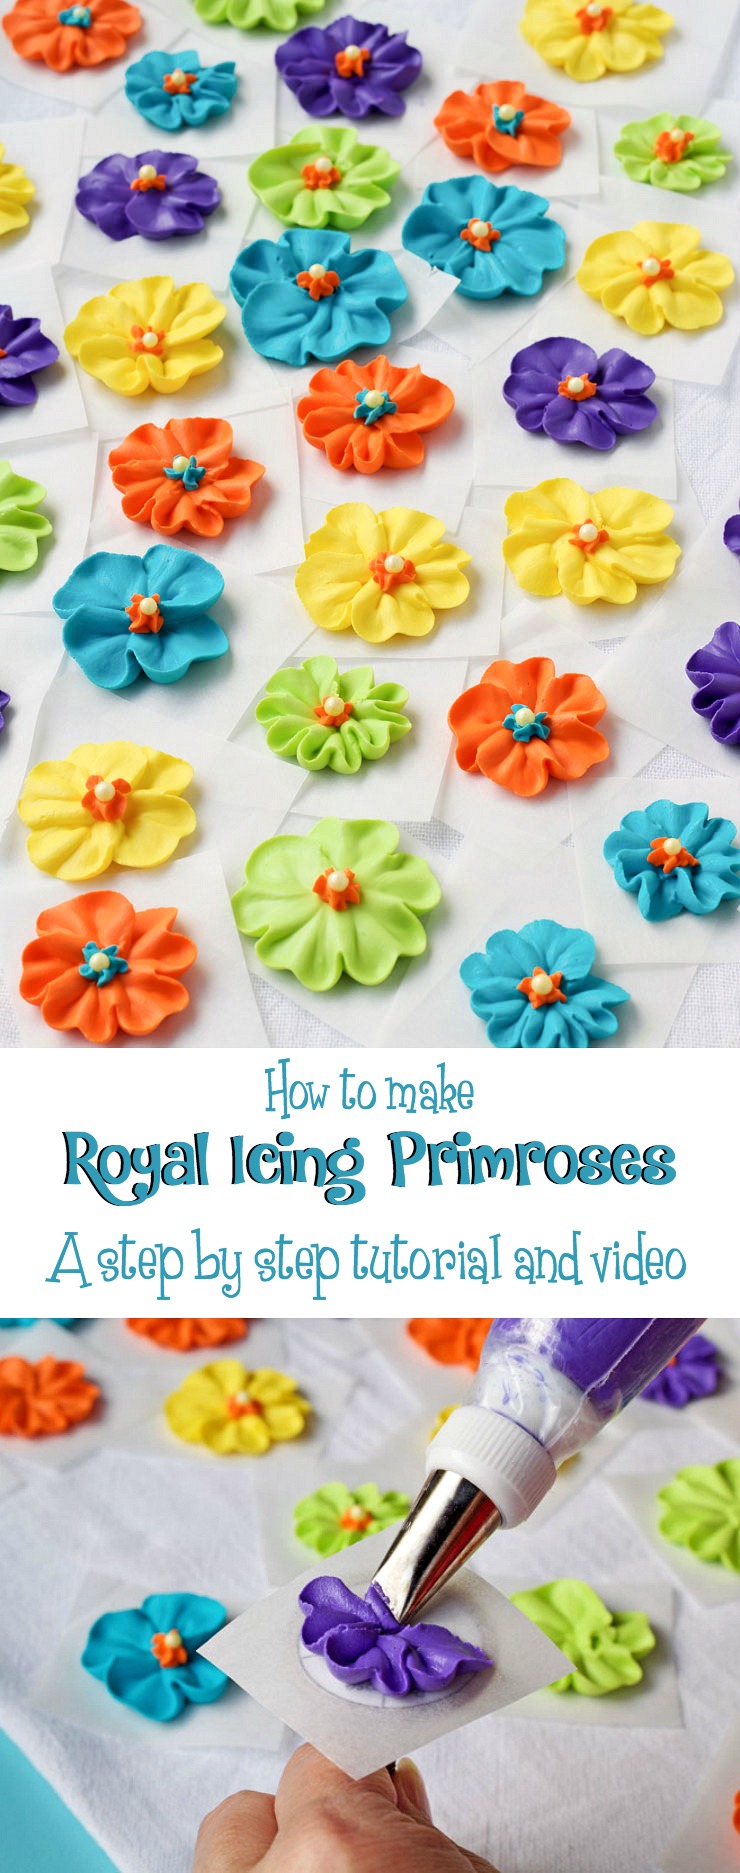 How to Make a Royal Icing Primrose with a Step by Step Video via www.thebearfootbaker.com